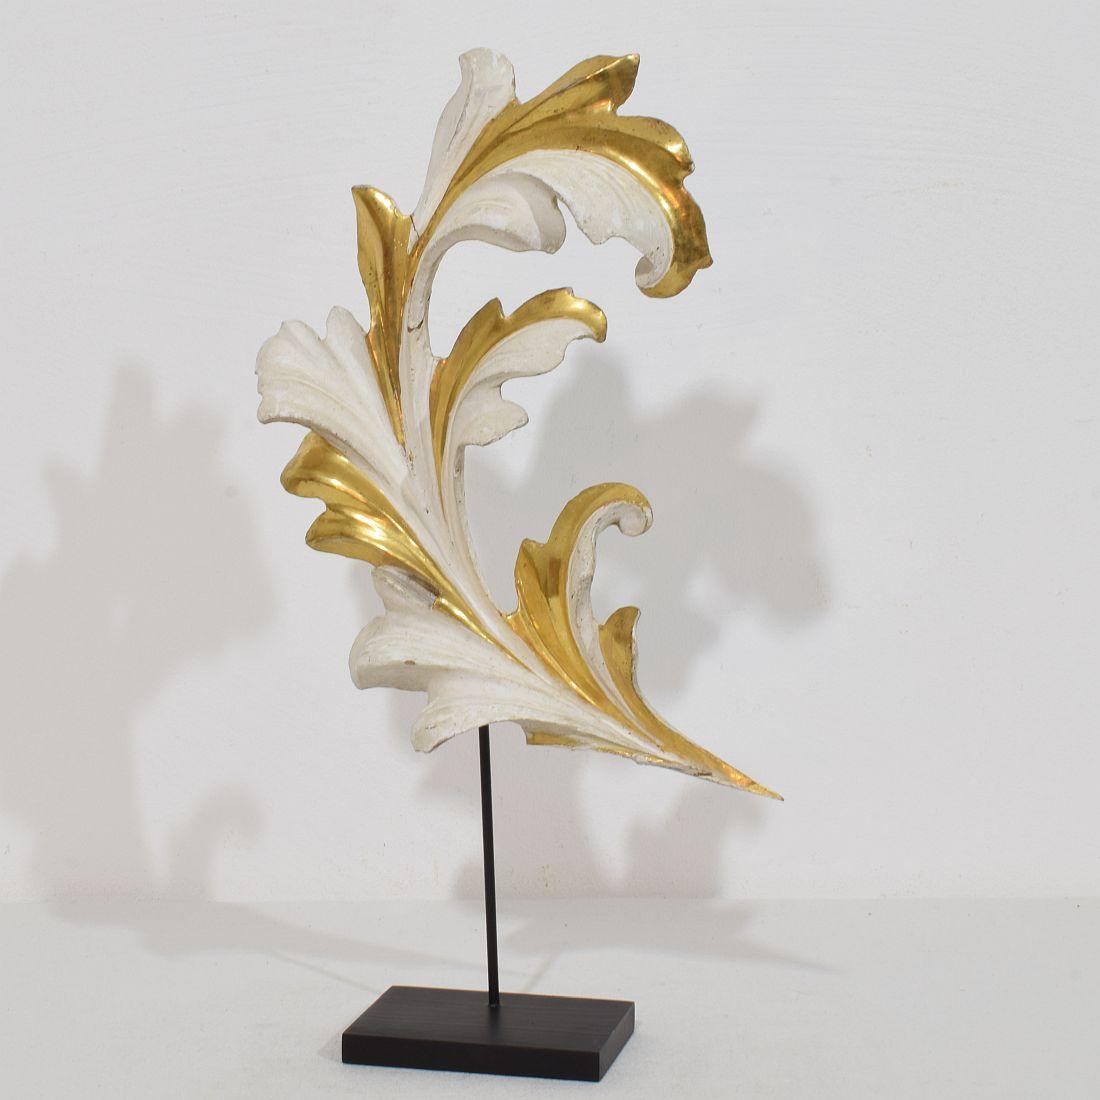 Beautiful handcarved giltwood acanthus leaf curl ornament that once adorned a chapel .Original period piece that due it’s high age has a wonderful weathered look.
Italy circa 1780/1850 , weathered,small losses and old repair.
Measurements include